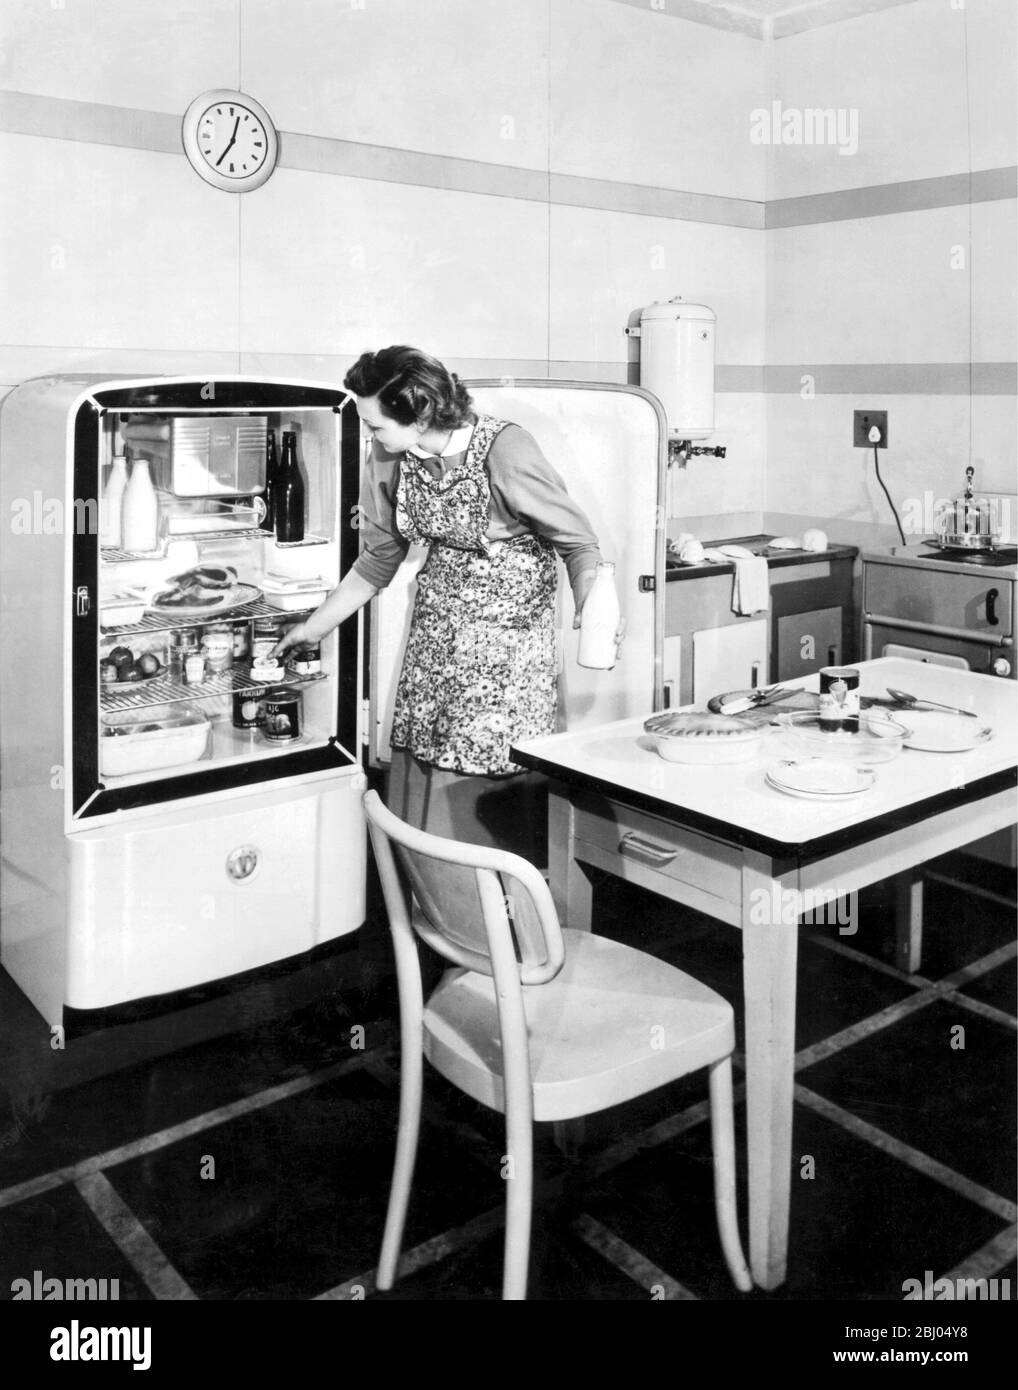 The English Electric company will show at the Ideal Home Exhibition 1949, their new 6.4 cubic ft. refrigerator, here seen in a modern kitchen. Stock Photo